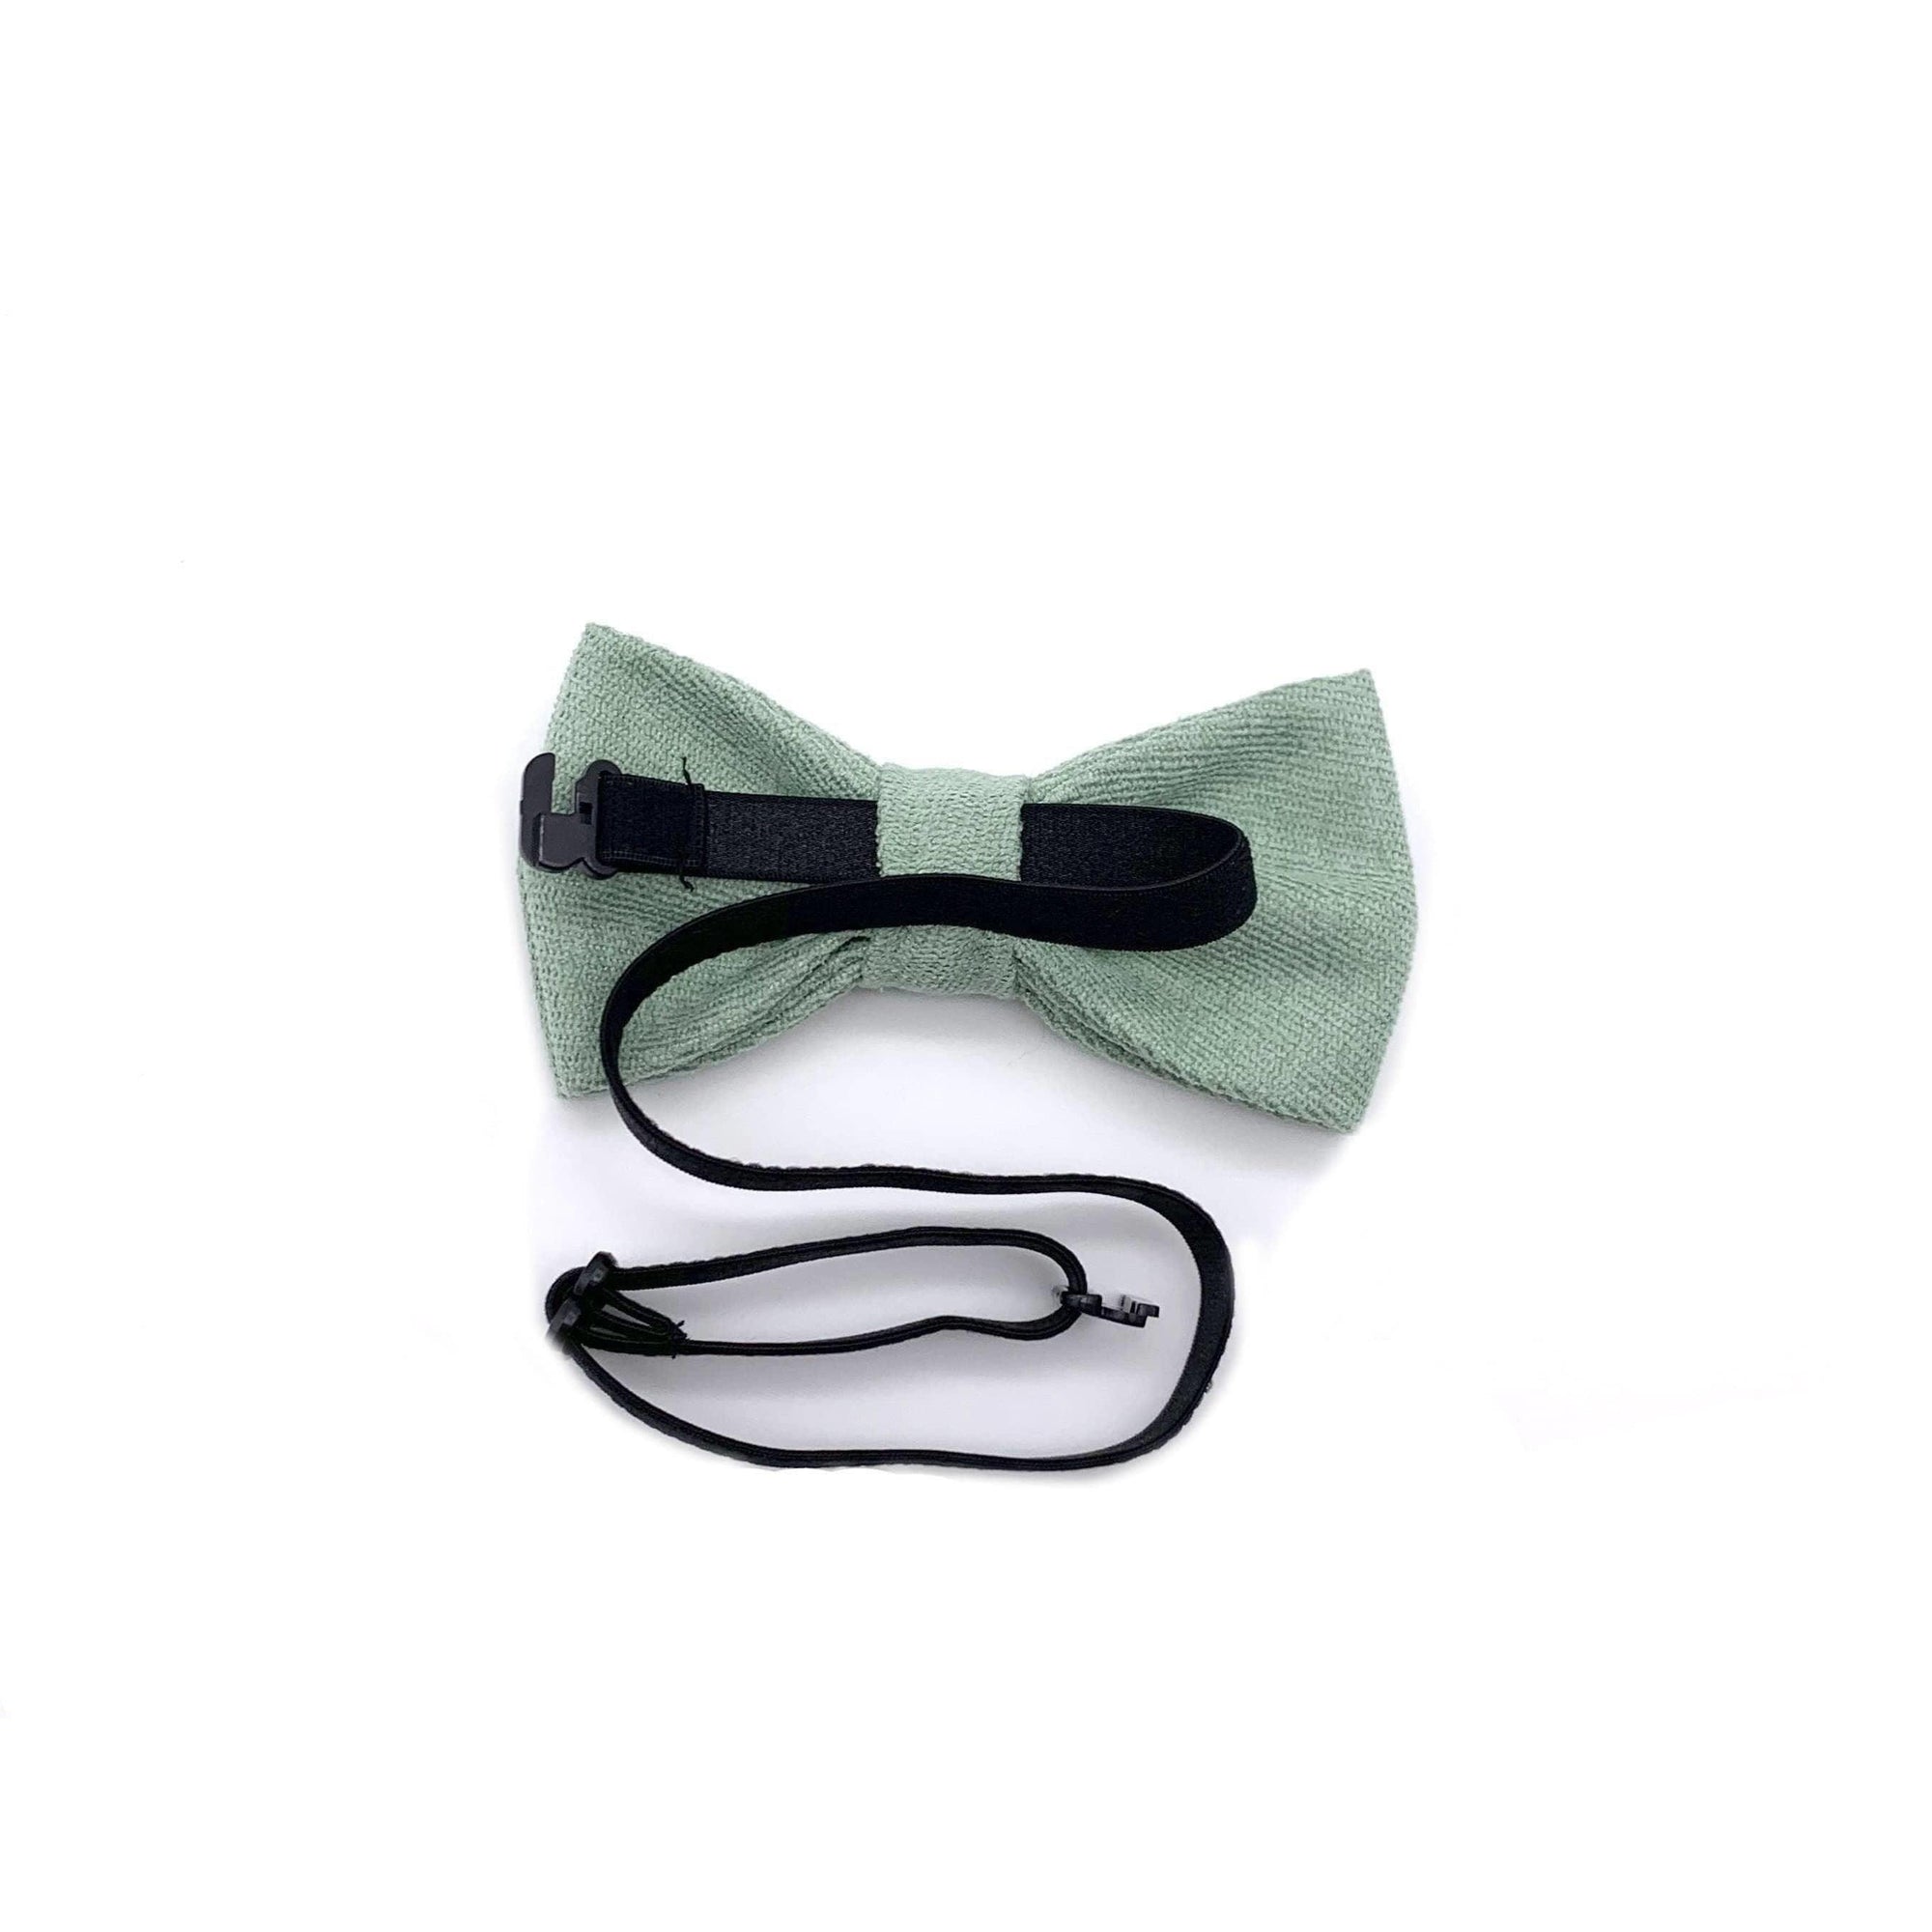 Sage Green Kids Floral Pre-Tied Bow Tie (EMME)-EMME Sage Green kids Floral Pre-Tied Bow tie for children and toddlers. Baby Bow tie SIZE: 10.5 by 6CM for toddlers and babies Bow tie comes pretied with strechable srtap on the back Color: Sage Green Great for Ring bearers Page Boys Weddings Photo shoots Photo sessions Sage green Bow tie for kids for weddings and events. Great anniversary present and gift. EMME Kids Floral Pre-Tied Bow tie Also great gift for the ring bearer and page boy to wear at